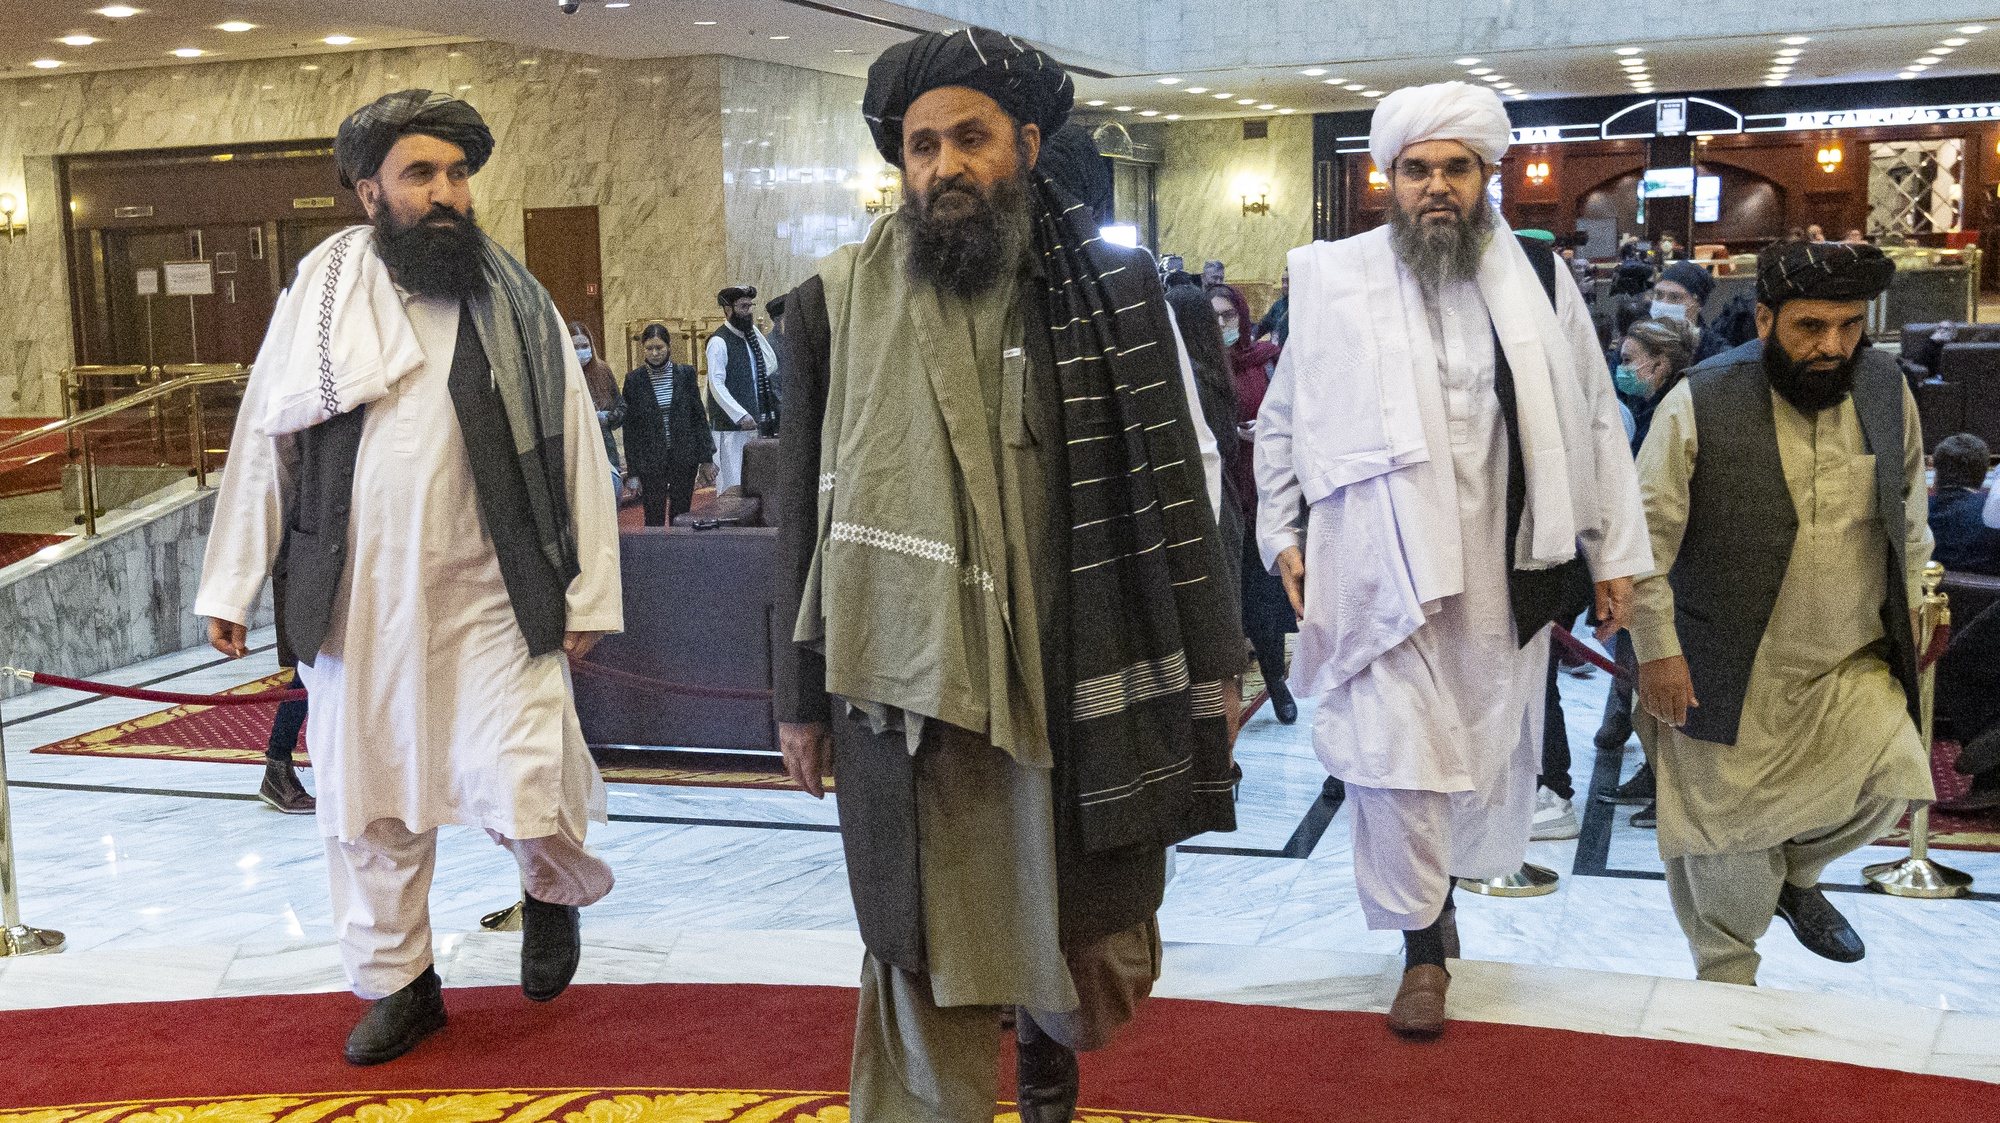 epa09082251 Taliban co-founder Mullah Abdul Ghani Baradar (C) arrives with other members of the Taliban delegation for attending an international peace conference in Moscow, Russia, 18 March 2021. Russia is hosting a peace conference for Afghanistan, bringing together government representatives and their Taliban adversaries along with regional observers in a bid to help jump-start the country&#039;s stalled peace process. The one-day gathering Thursday is the first of three planned international conferences ahead of a May 1 deadline for the final withdrawal of U.S. and NATO troops from the country, a date fixed under a year-old agreement between the Trump administration and the Taliban.  EPA/ALEXANDER ZEMLIANICHENKO / POOL